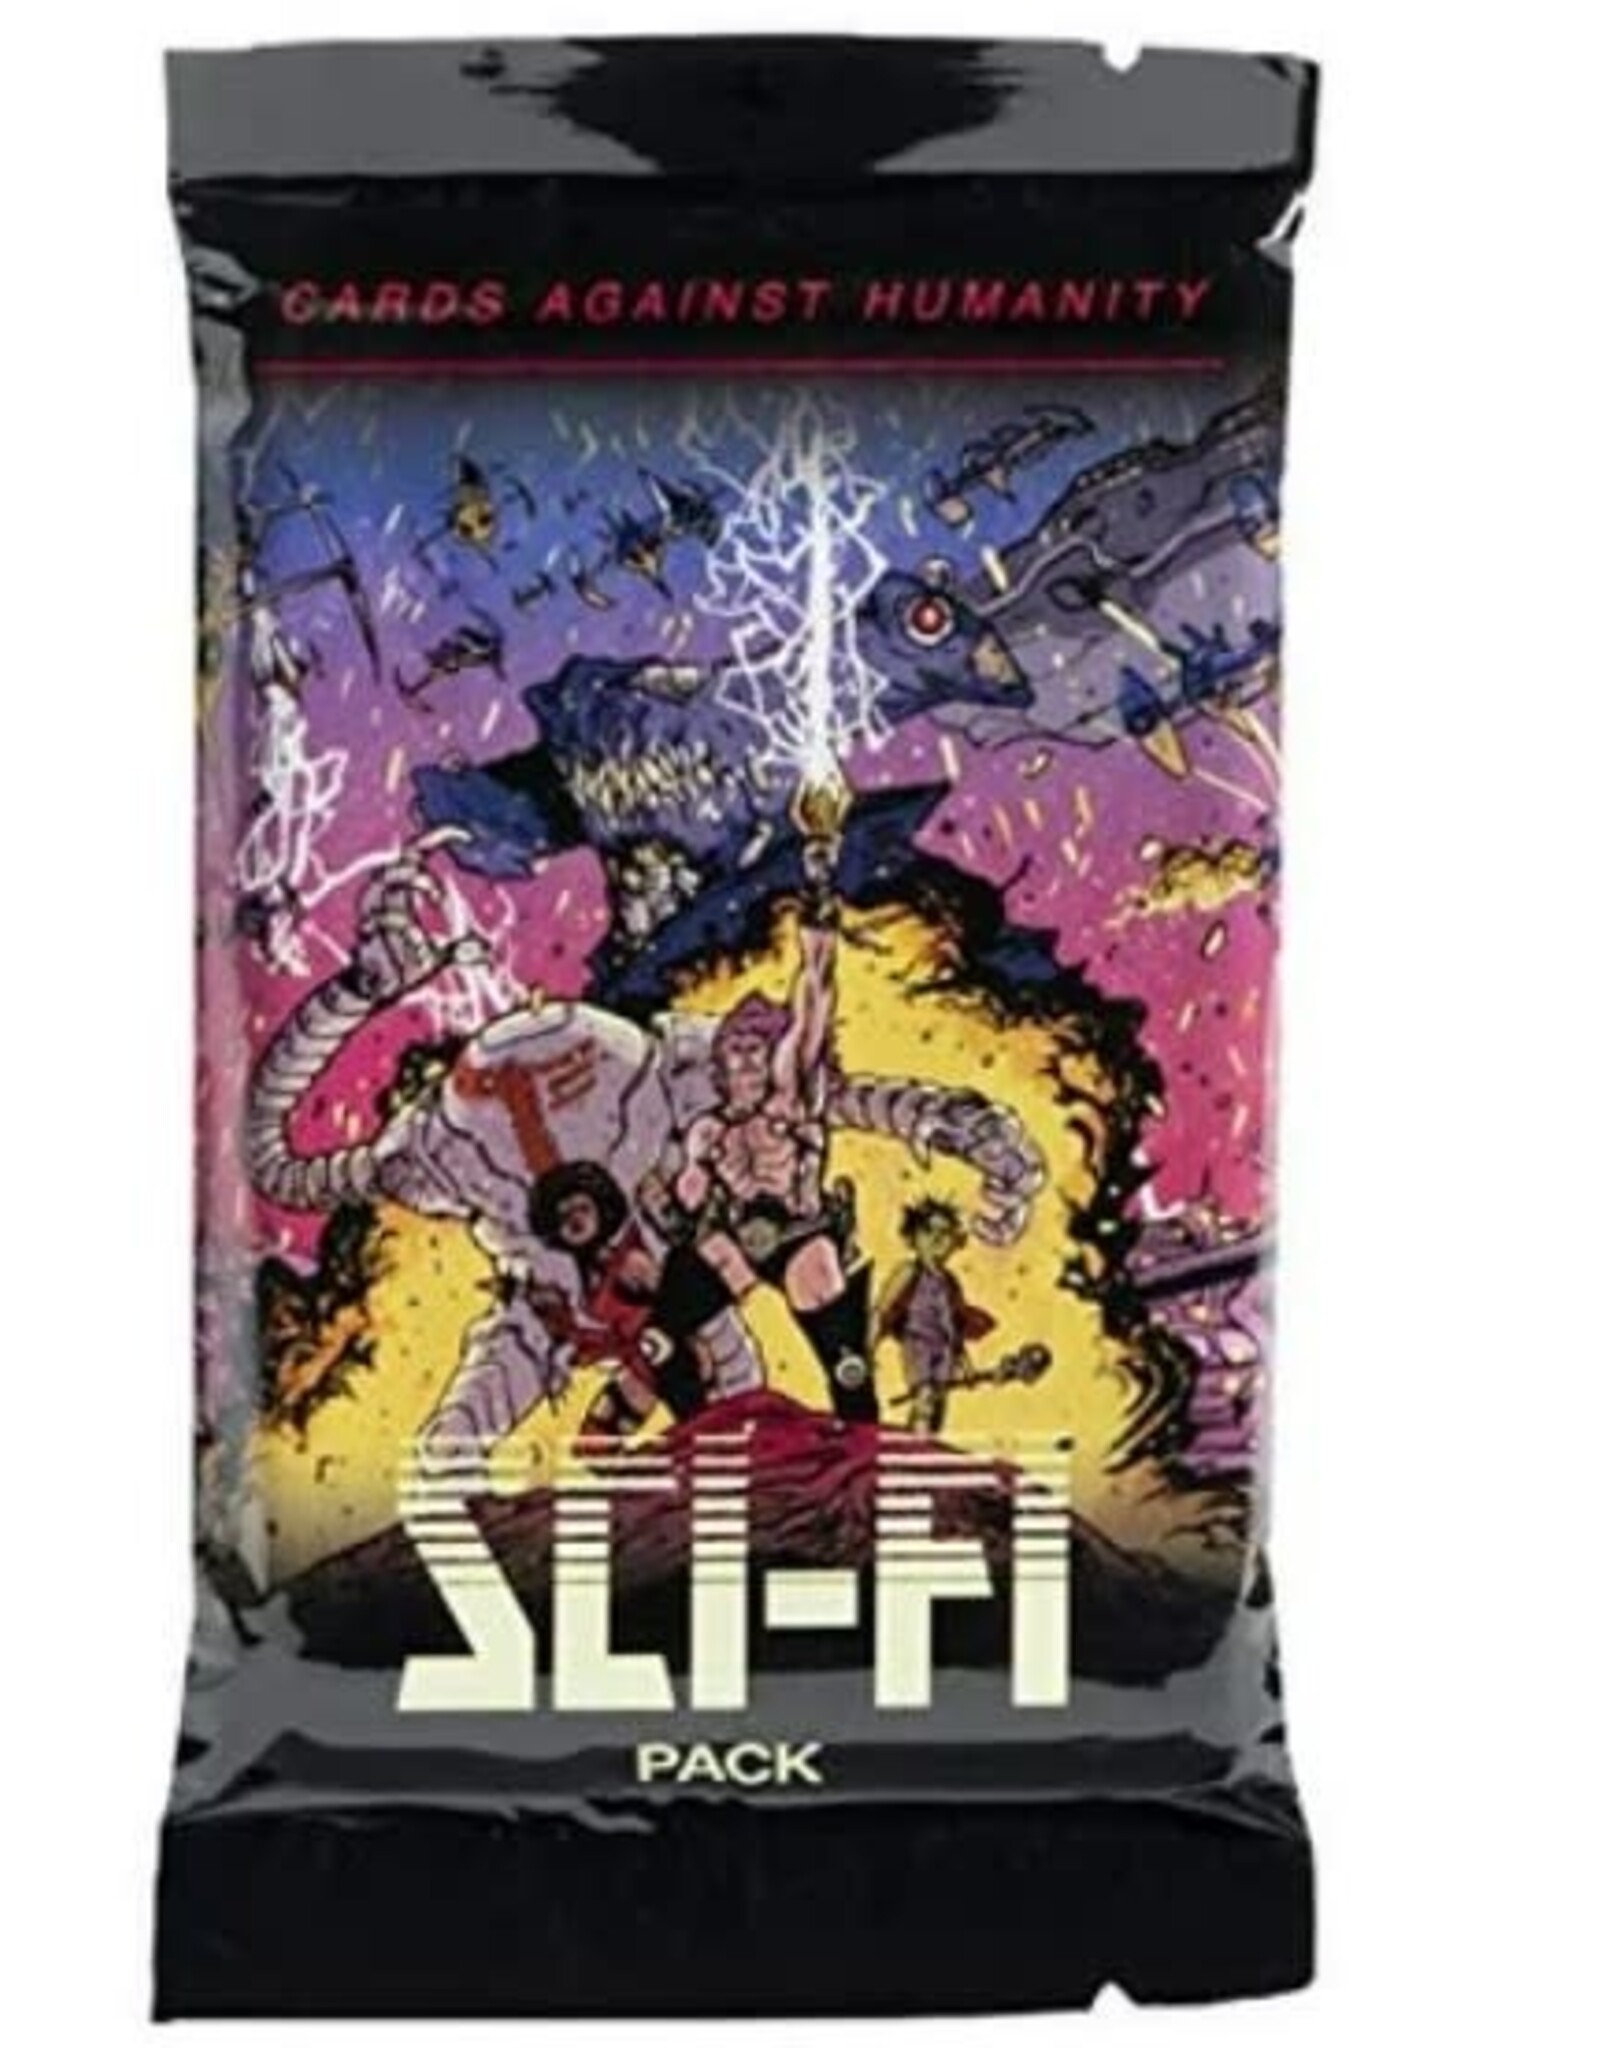 CARDS AGAINTST HUMANITY (SCI-FI PACK)